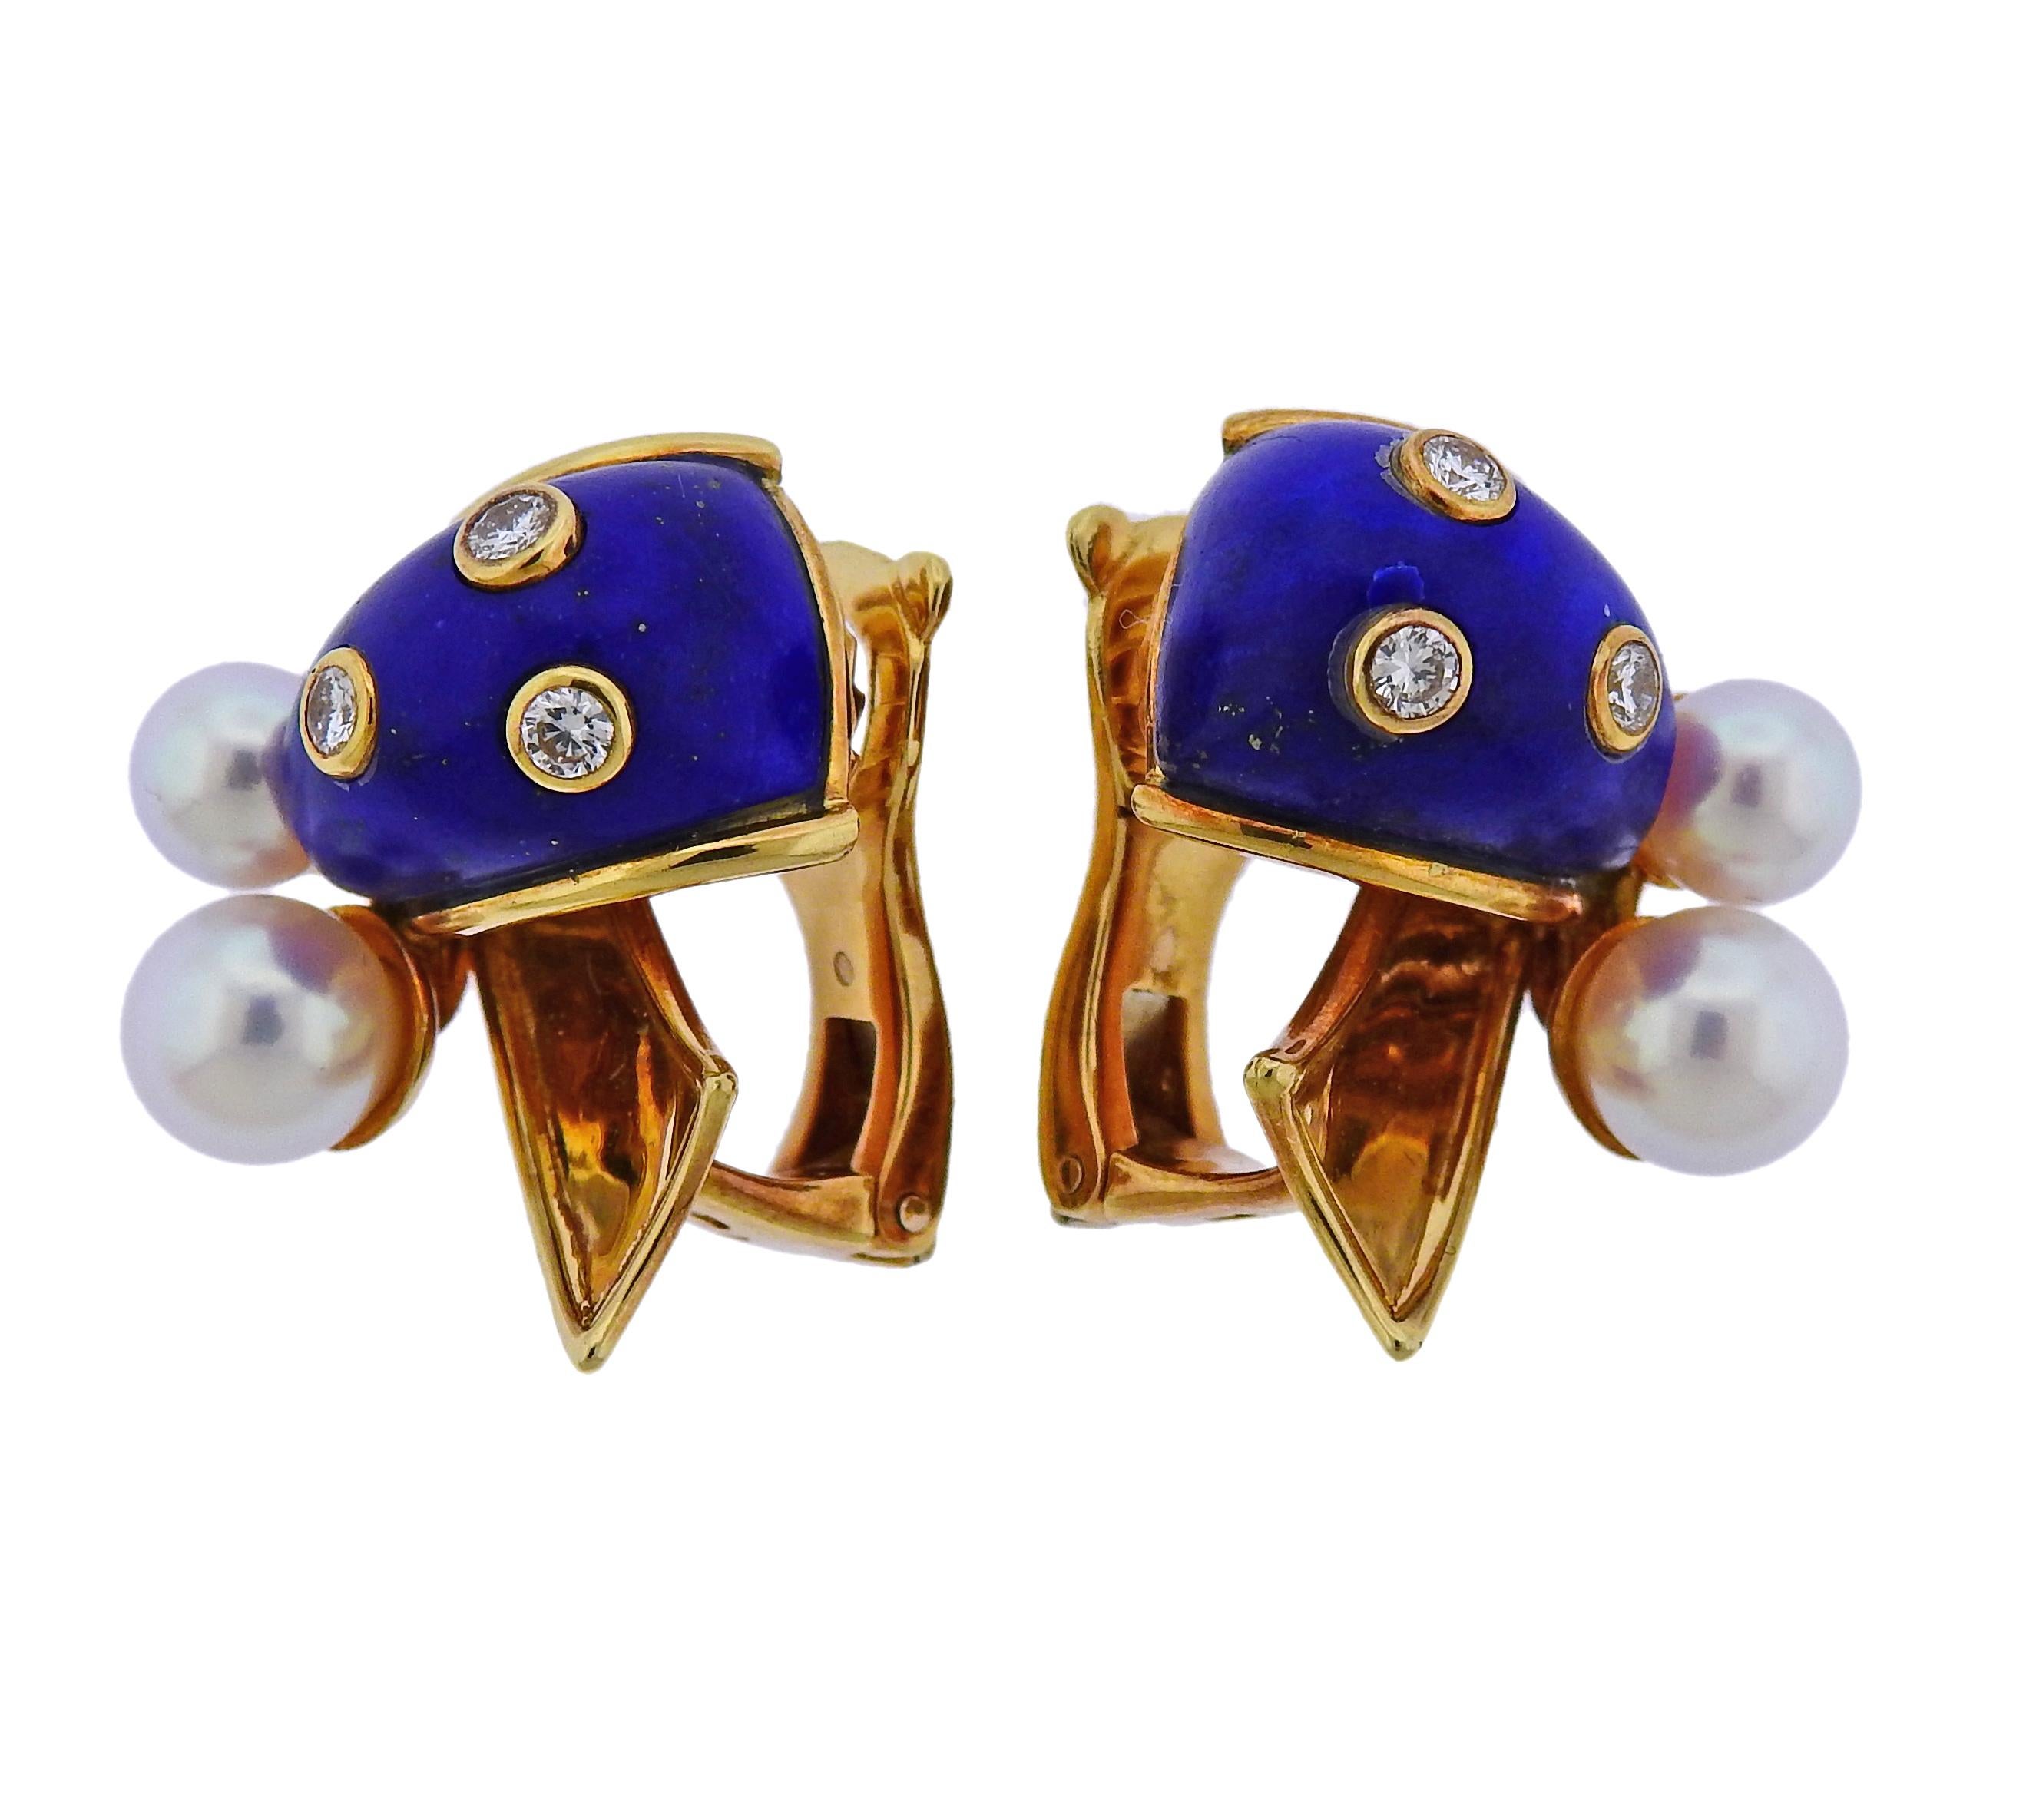 Pair of 18k yellow gold earrings by Christian Dior, set with 5.5mm and 6.5mm pearls, lapis and approx. 0.30ctw in G/VS diamonds. Earrings are 21mm x 20mm and weigh 17.9 grams. Marked Dior, or750, Gold marks.